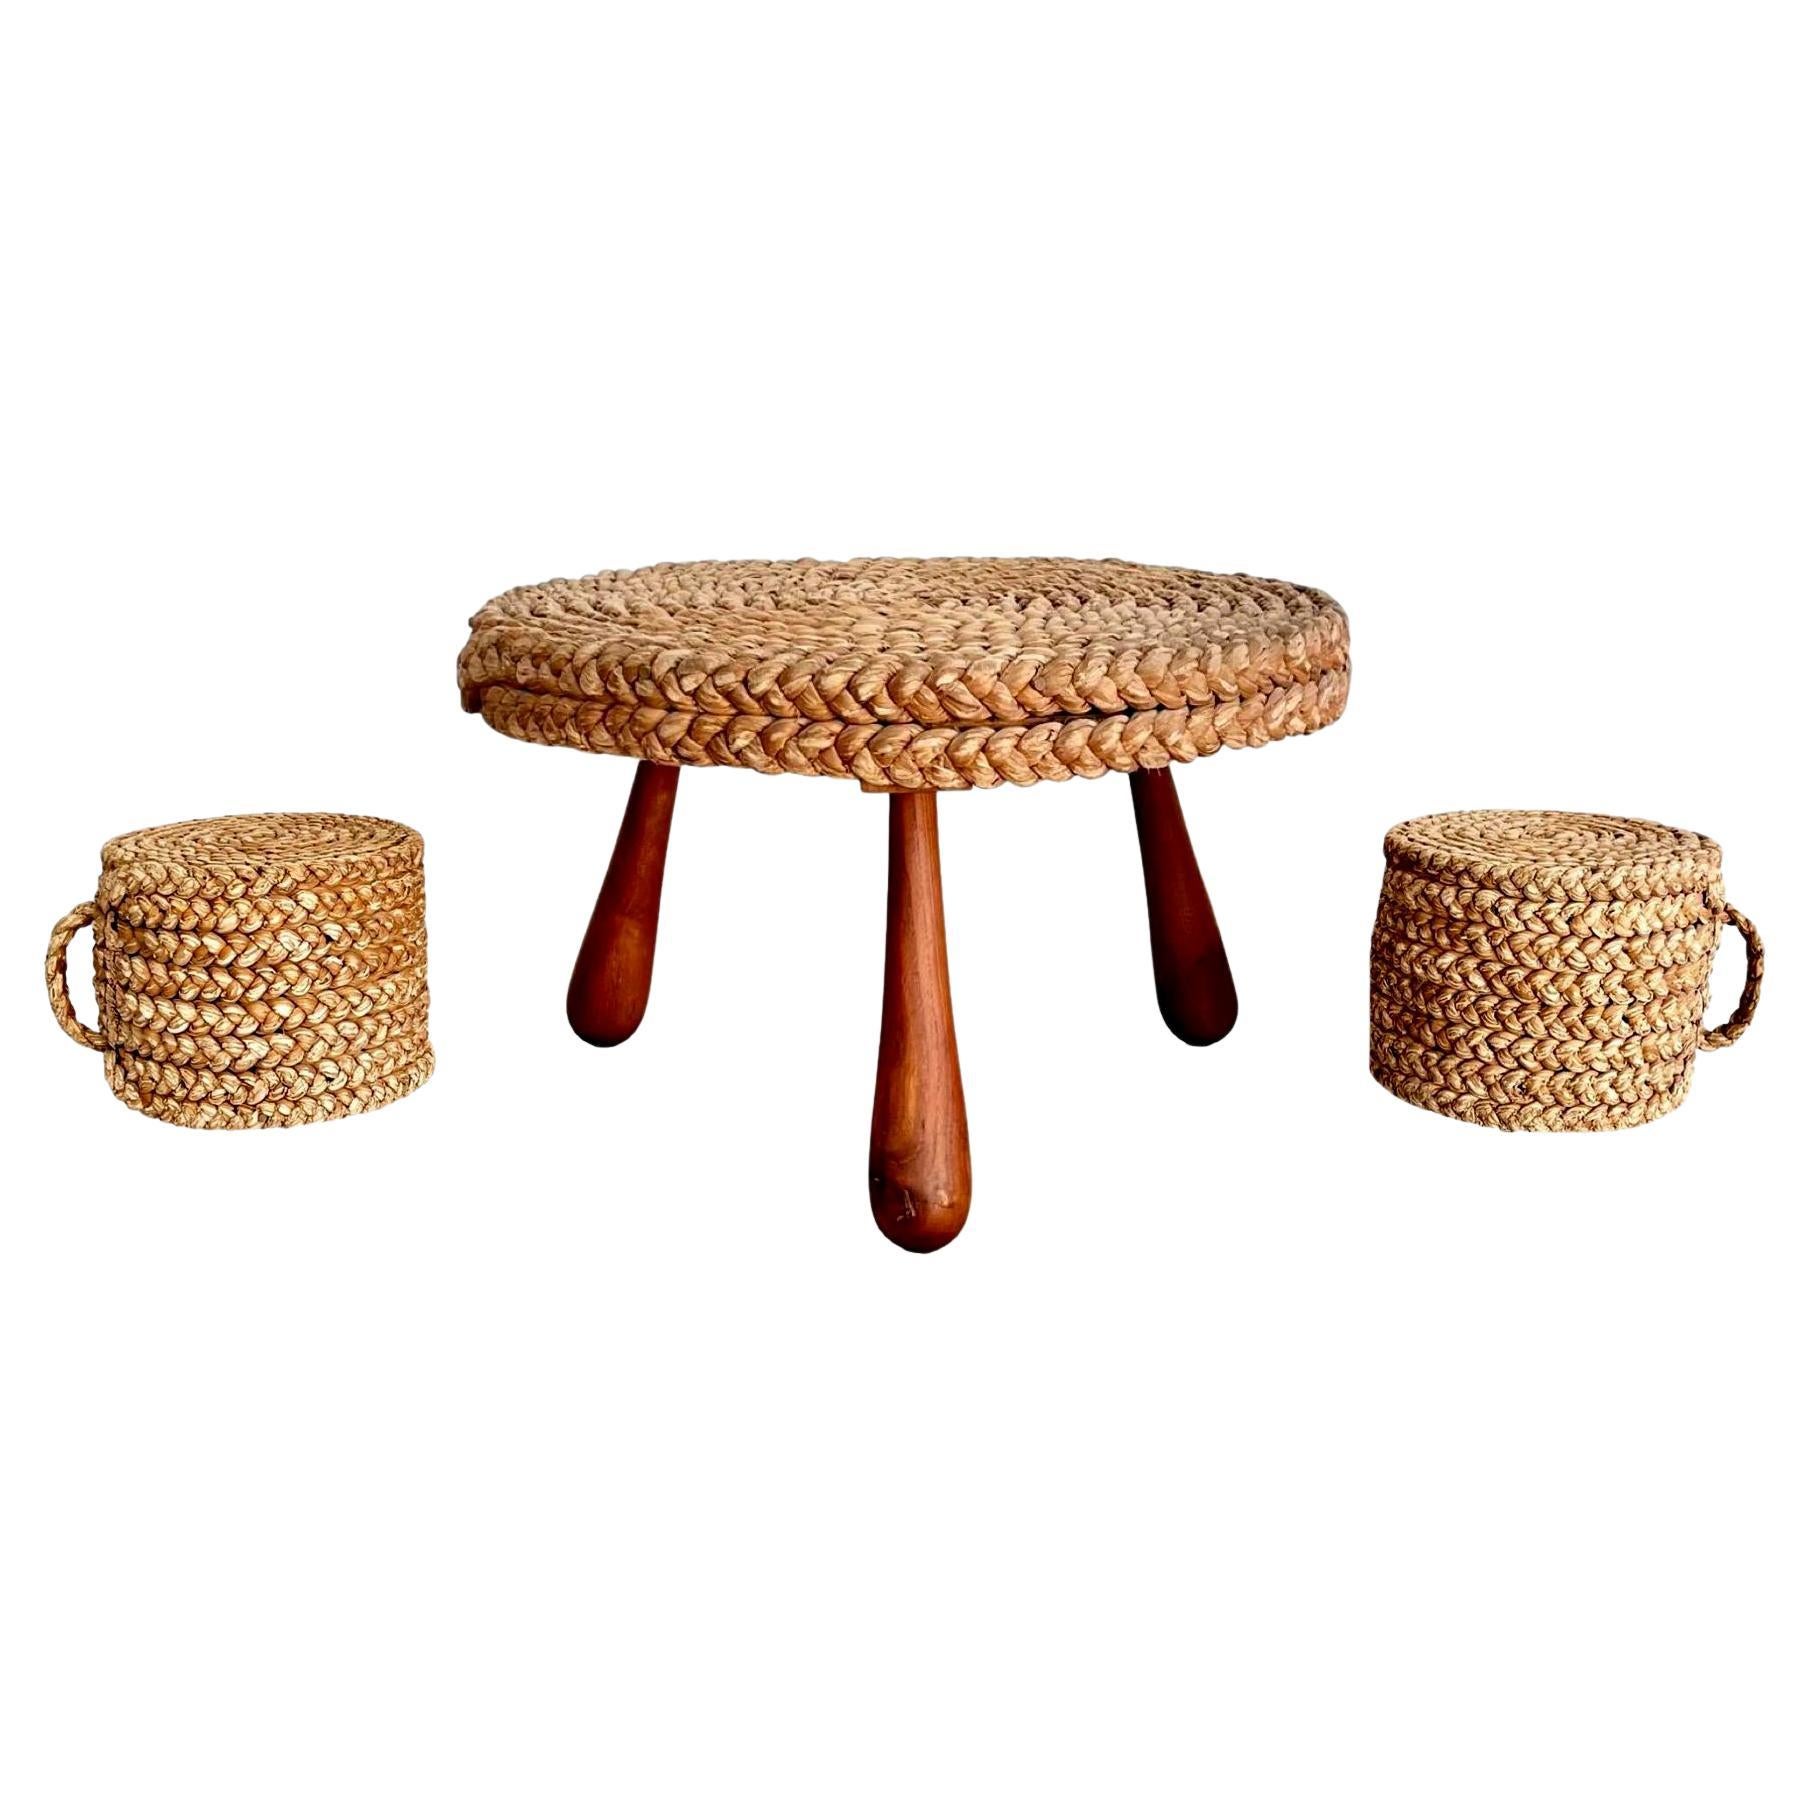 Rope and Wood Table with Two Nesting Stools, 1960s France For Sale